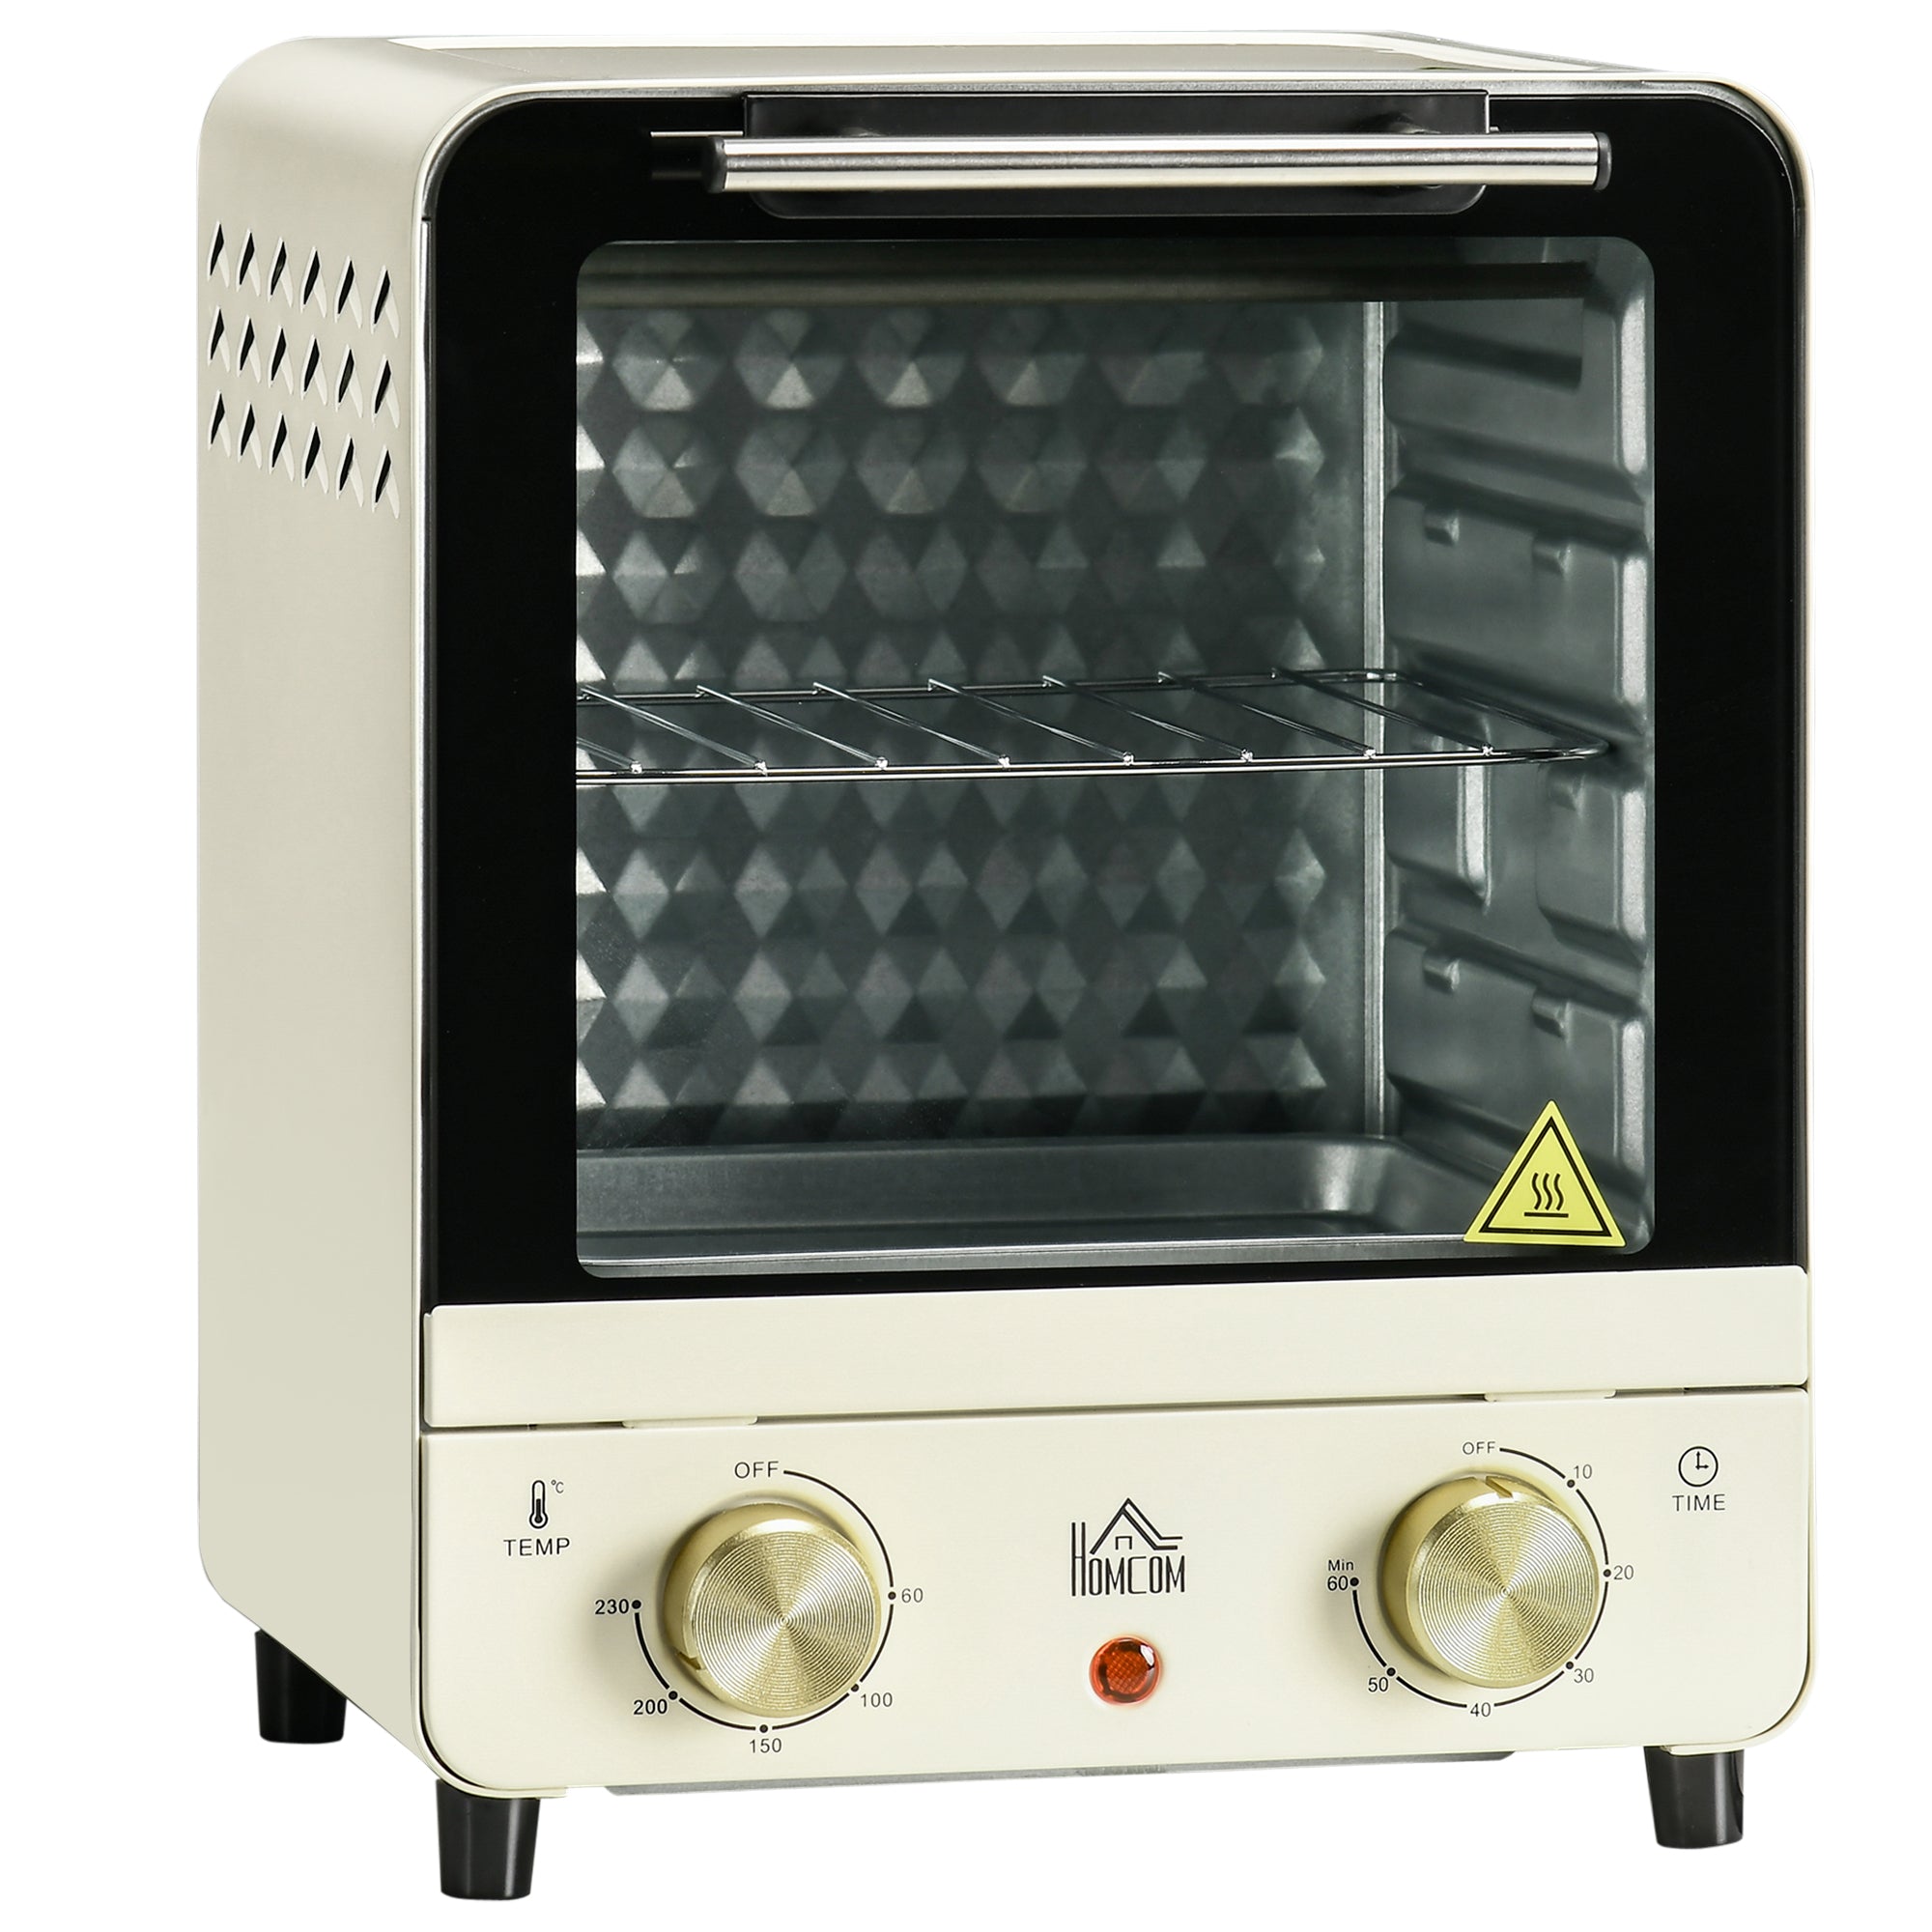 HOMCOM Convection Mini Oven, 15 Litres Electric Oven and Grill with 60-230? Adjustable Temperature, 60 Minute Timer, Include Baking Tray, Wire Rack and Crumb Tray, 1000W, Cream White